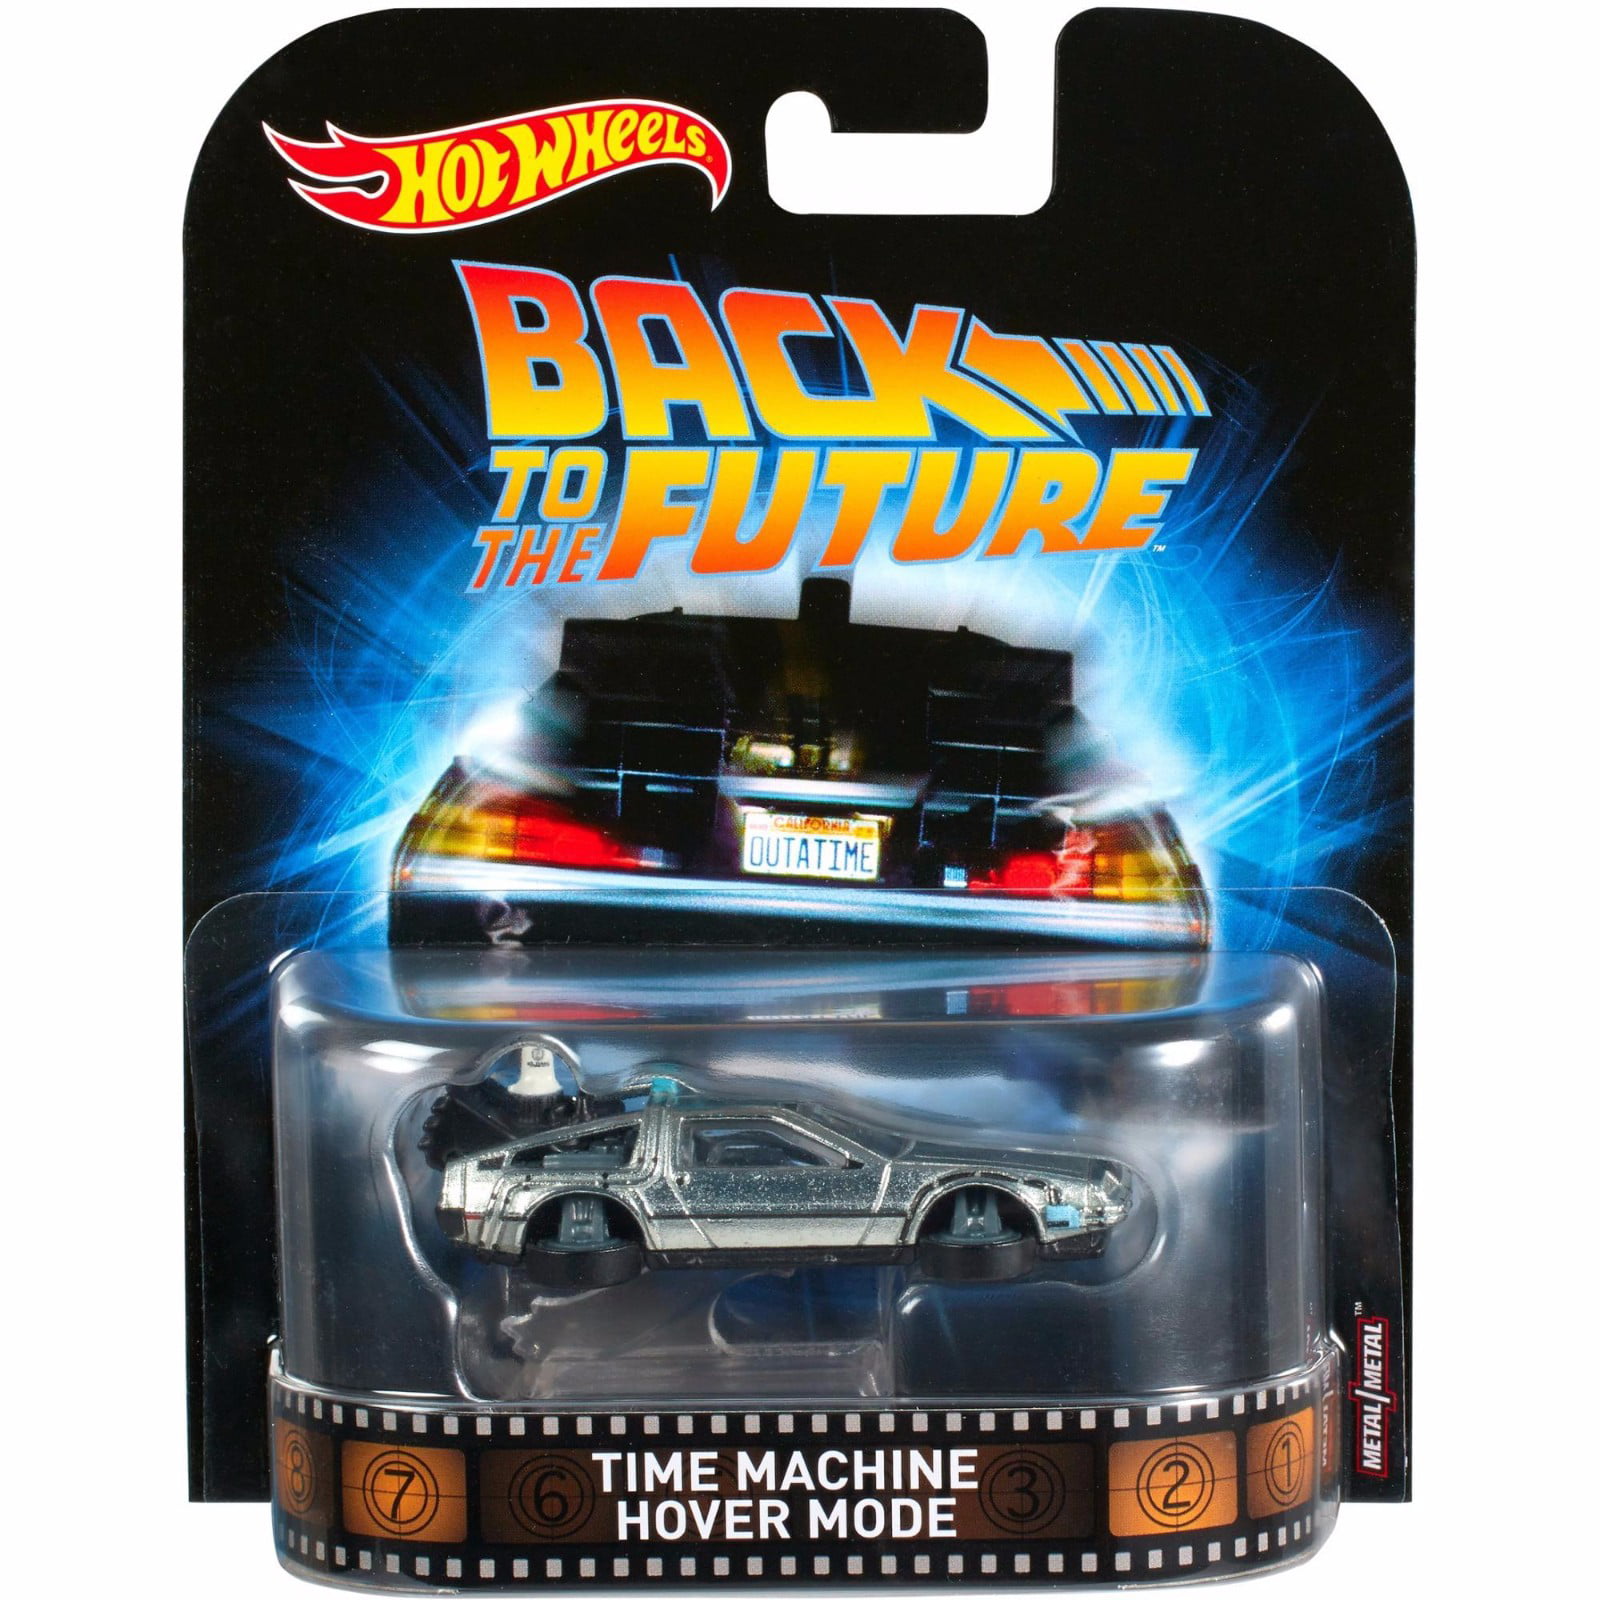 Back to the Future II Time Machine Hover Mode Hot Wheels 2017 Retro Series  1/64 Die Cast Vehicle